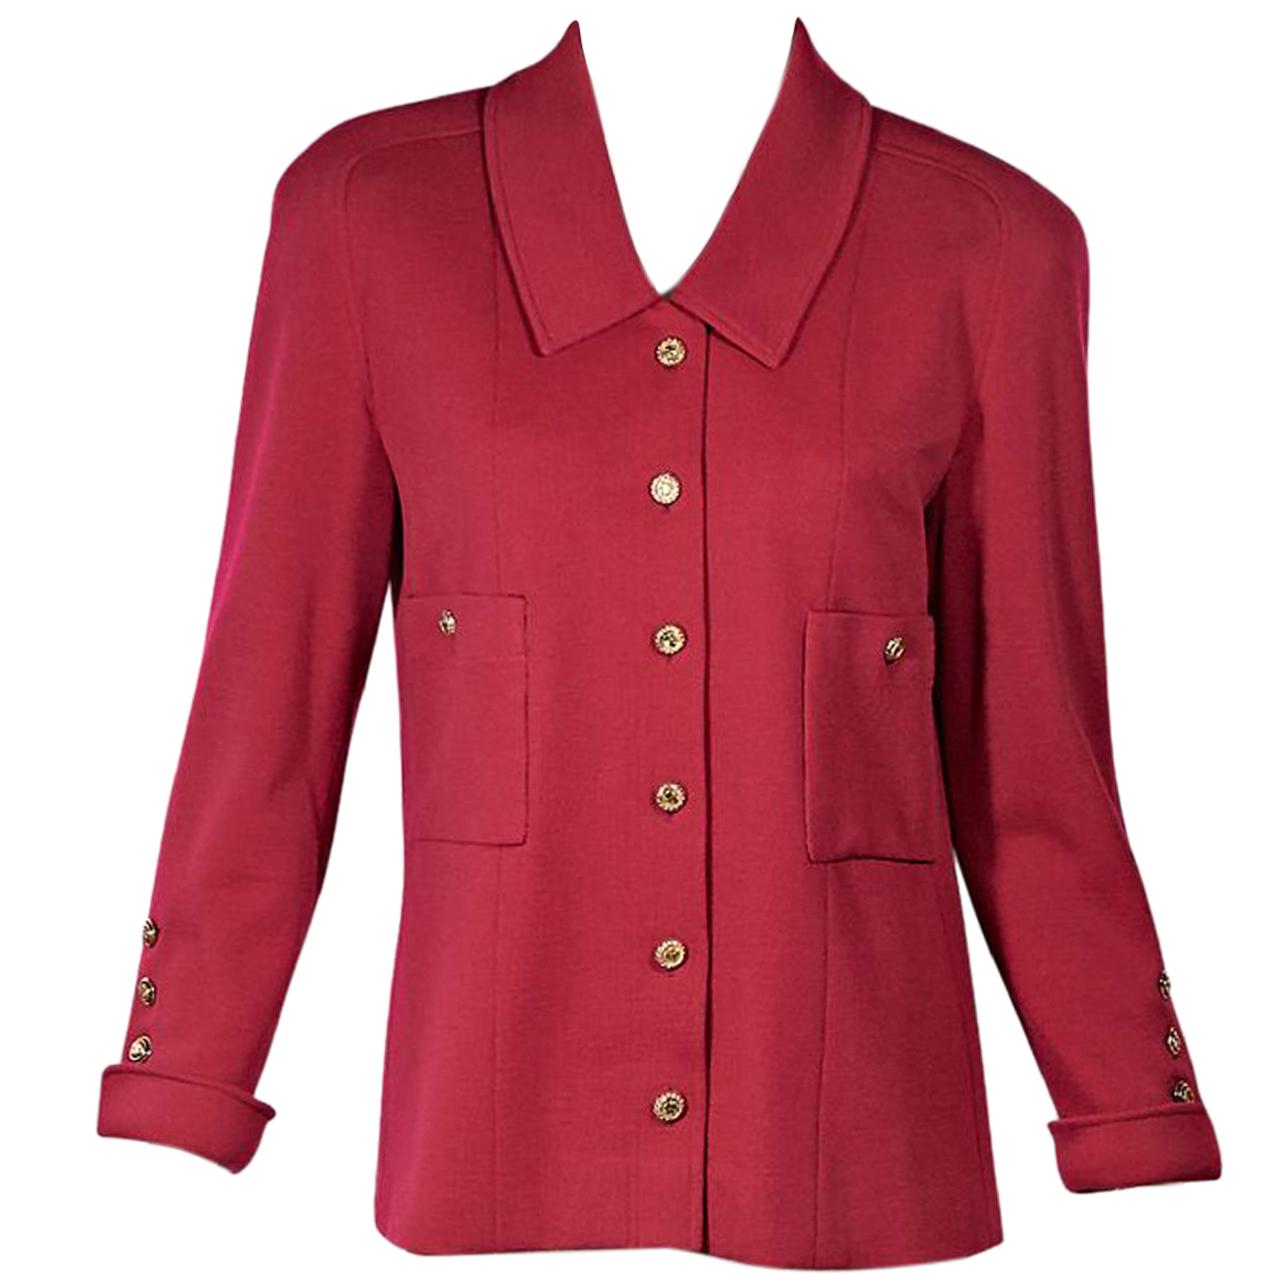 Hot Pink Vintage Chanel Button-Front Jacket